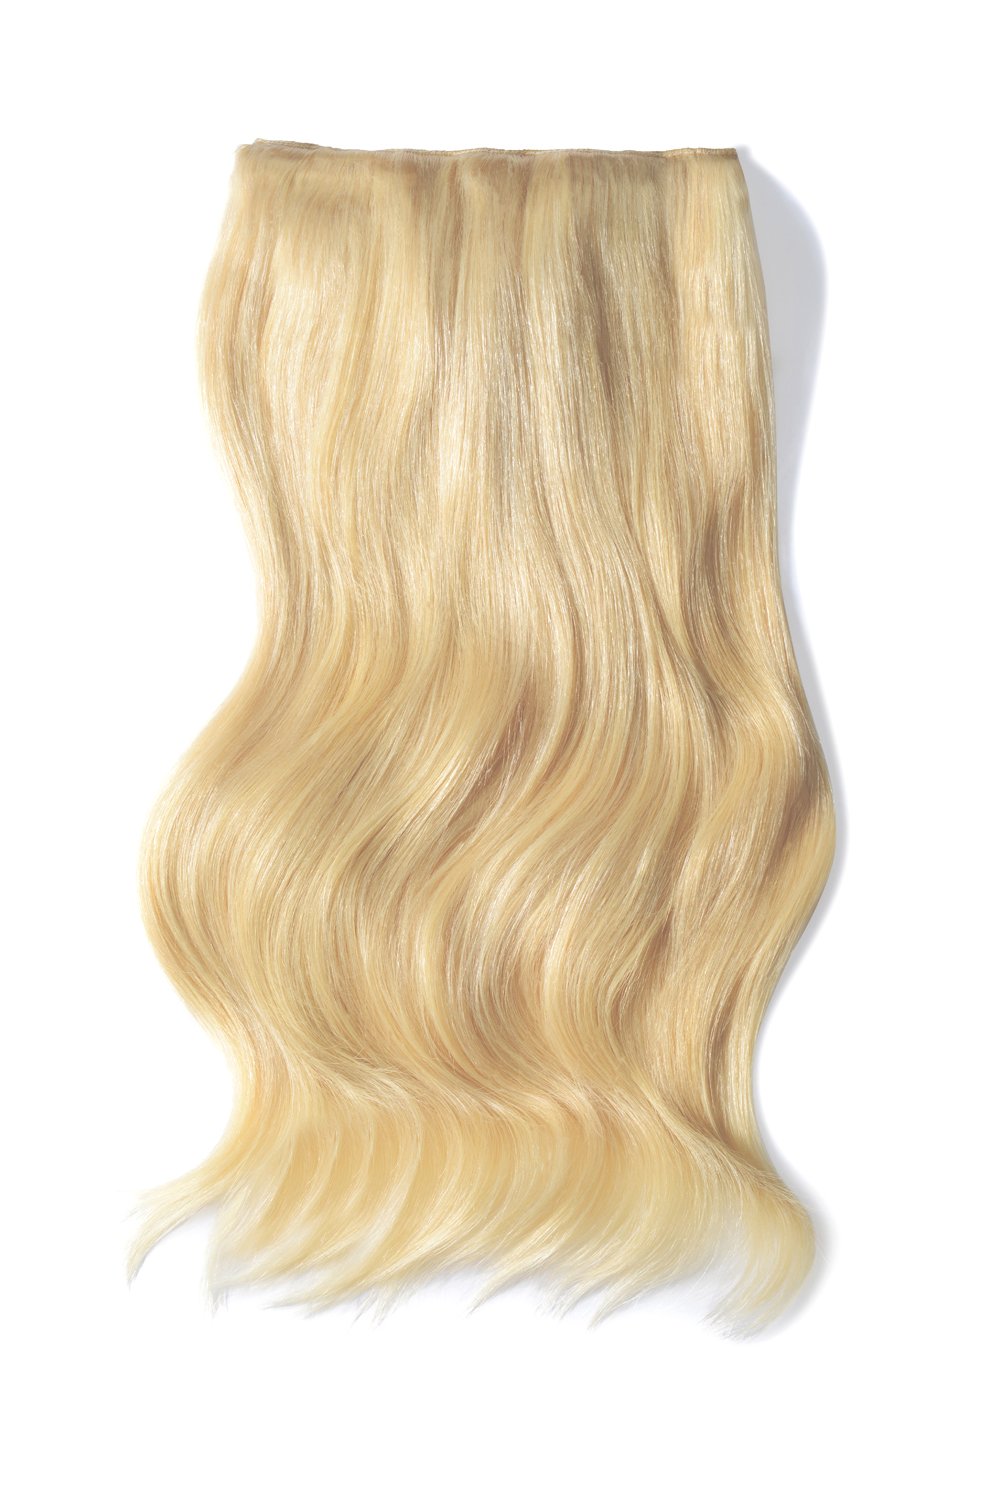 Double Wefted Full Head Remy Clip in Human Hair Extensions - Bleach Blonde (613)